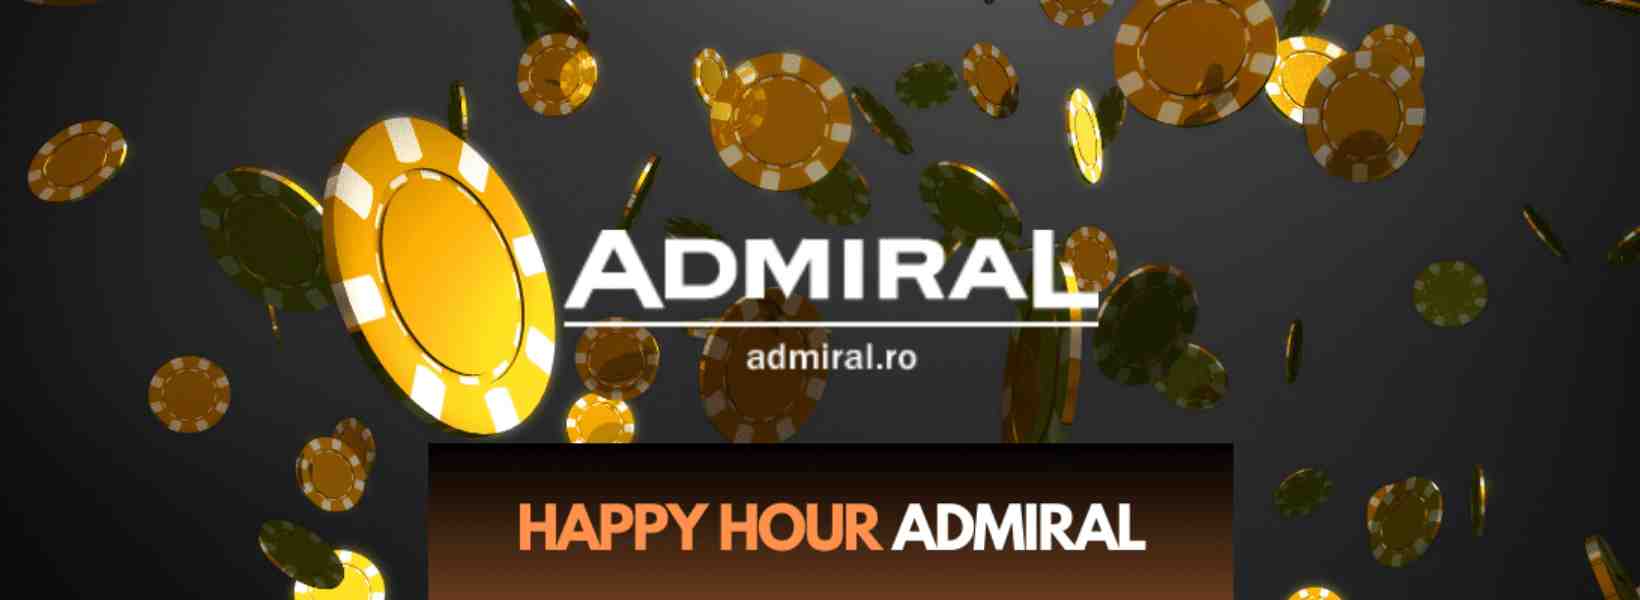 admiral happy hour